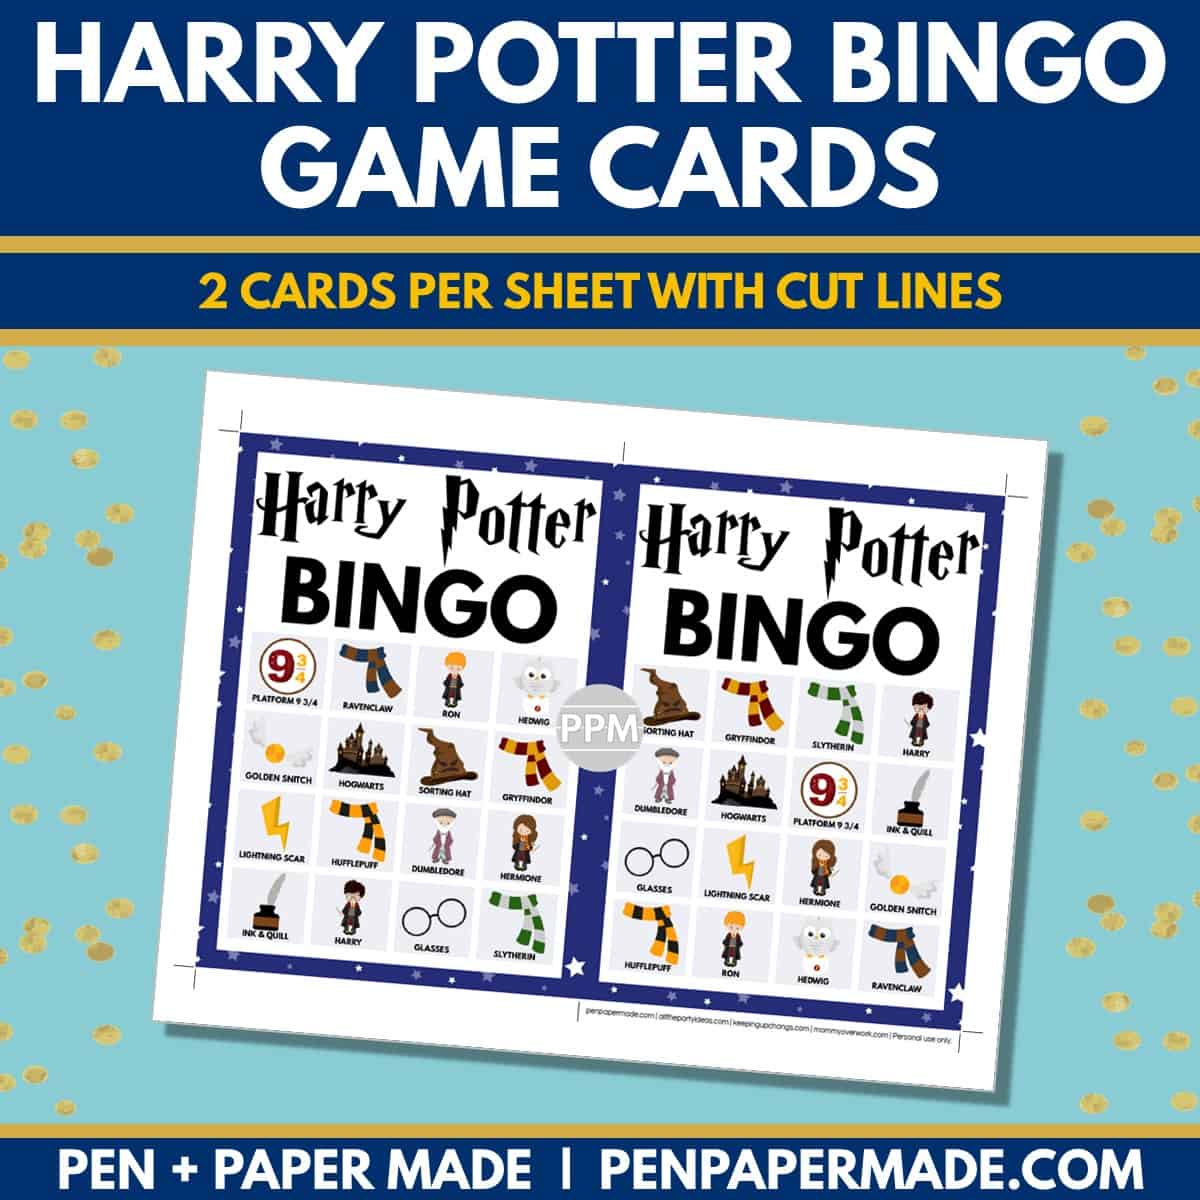 wizard and harry potter bingo card 4x4 5x7 game boards with images and text words.